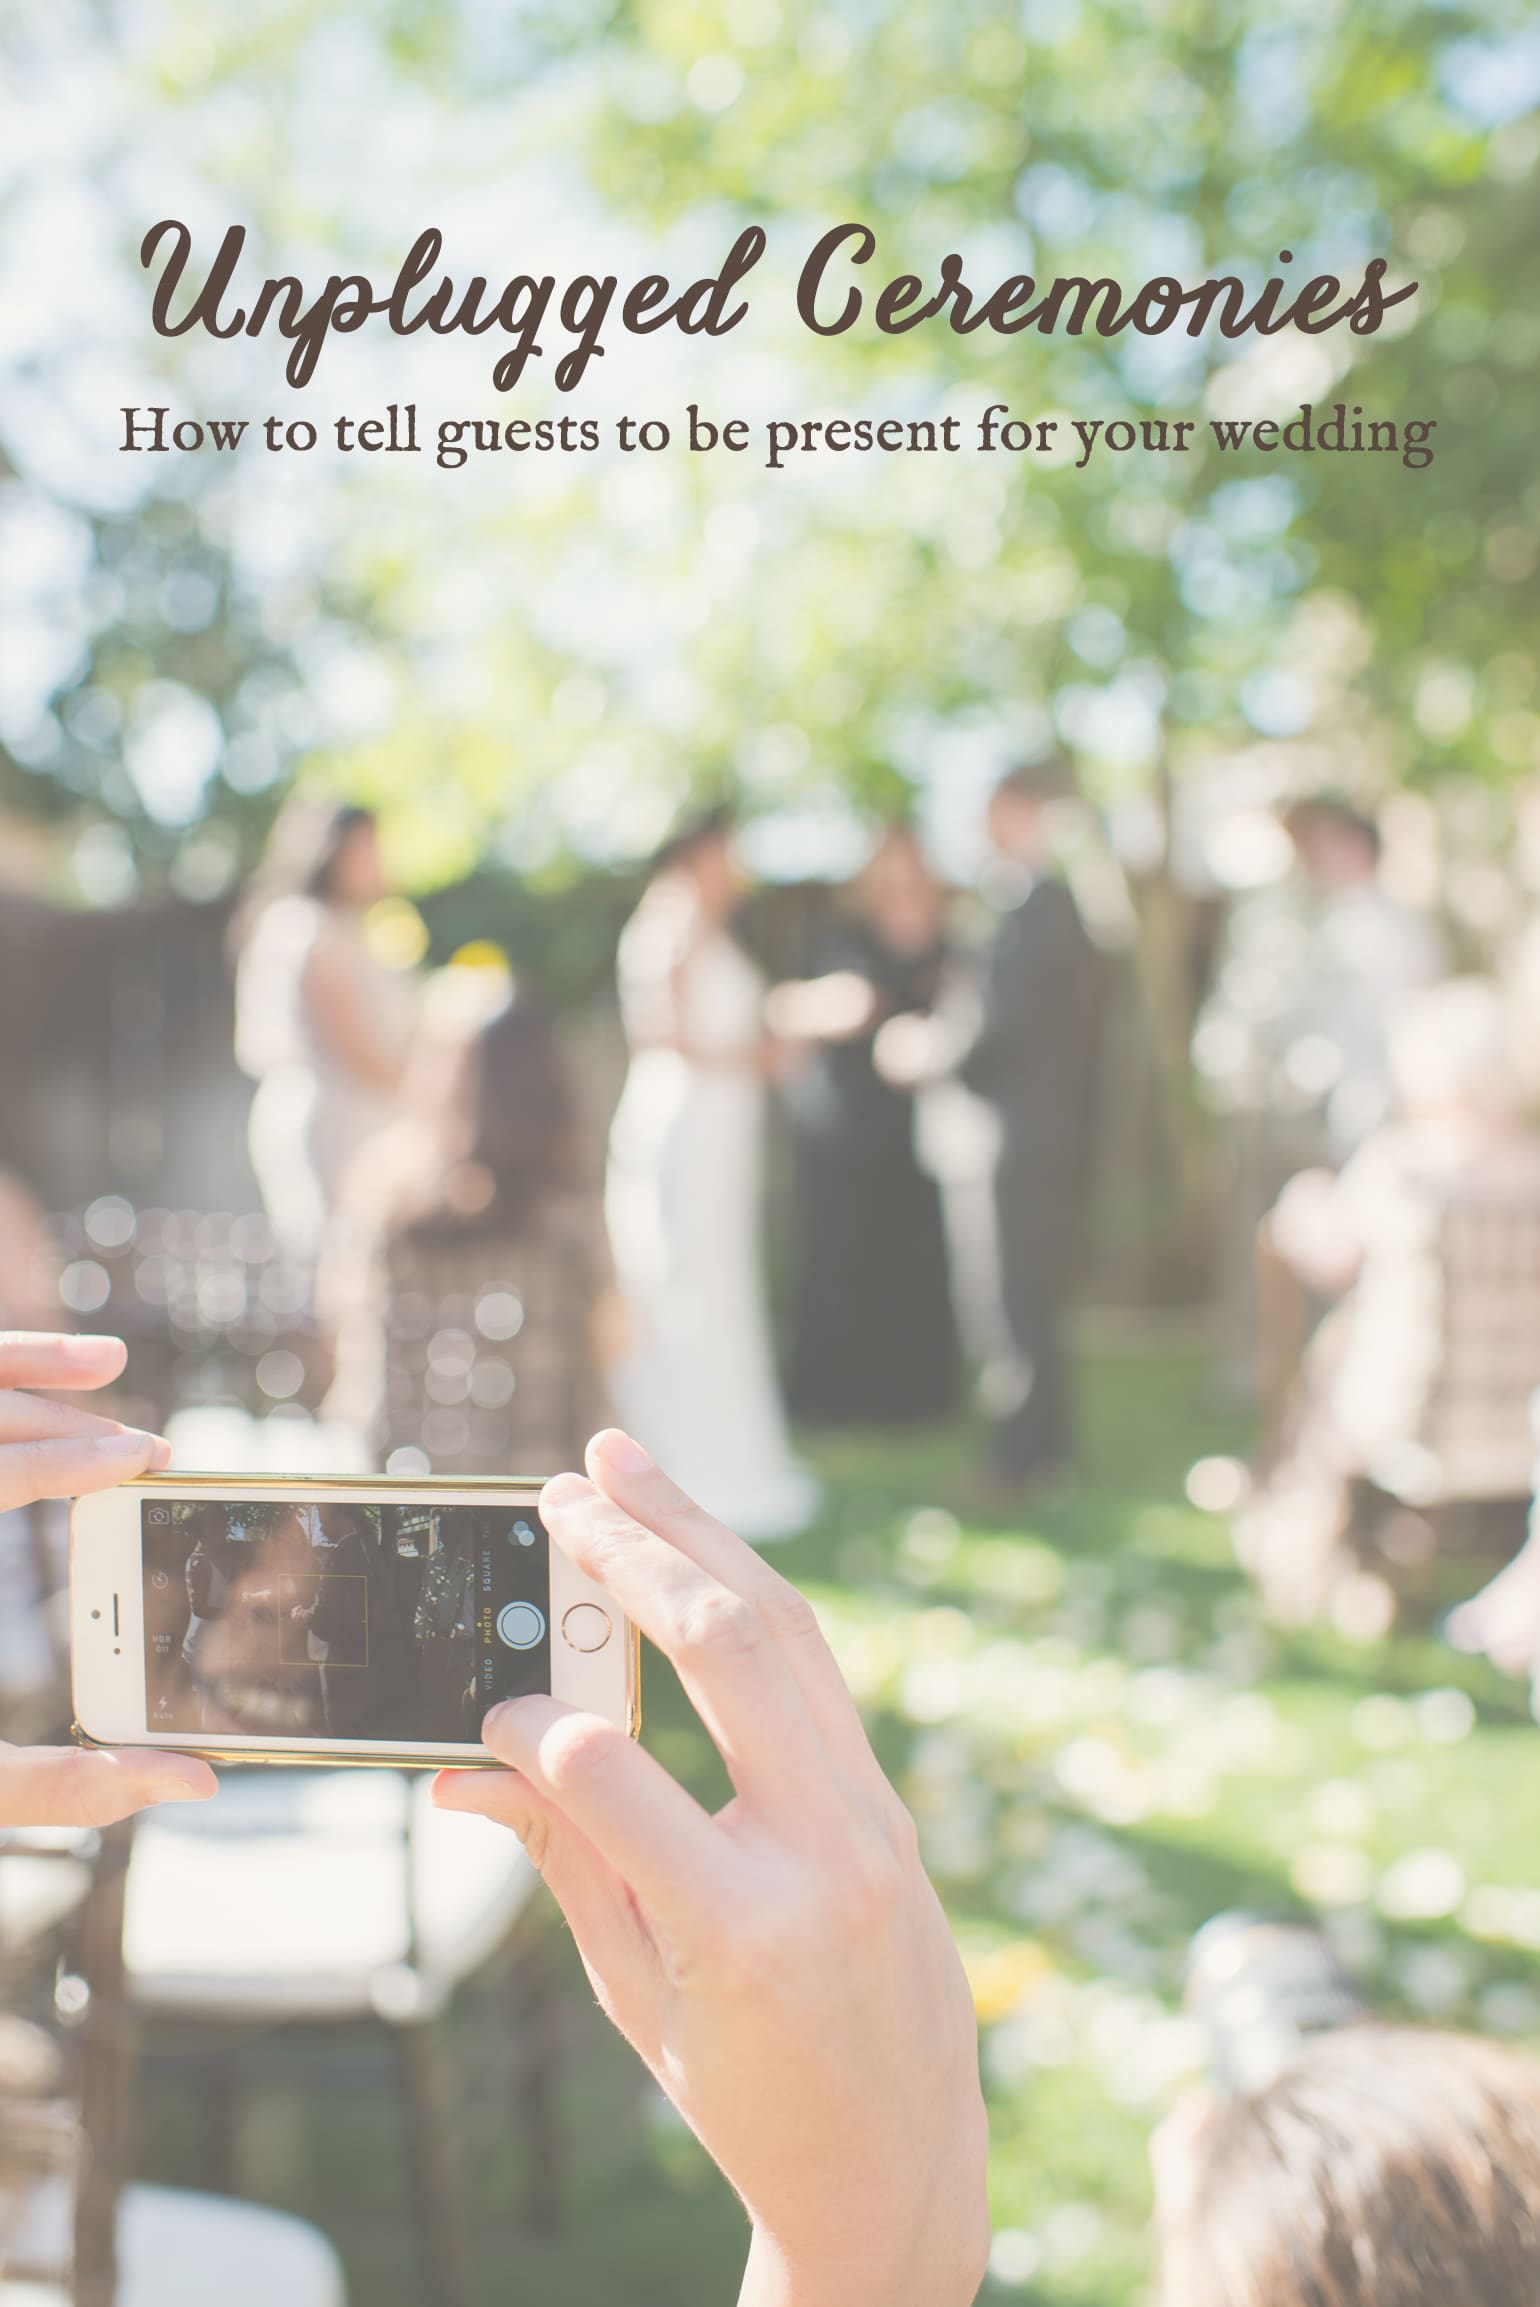 how to tell guests to turn their phones off during weddings